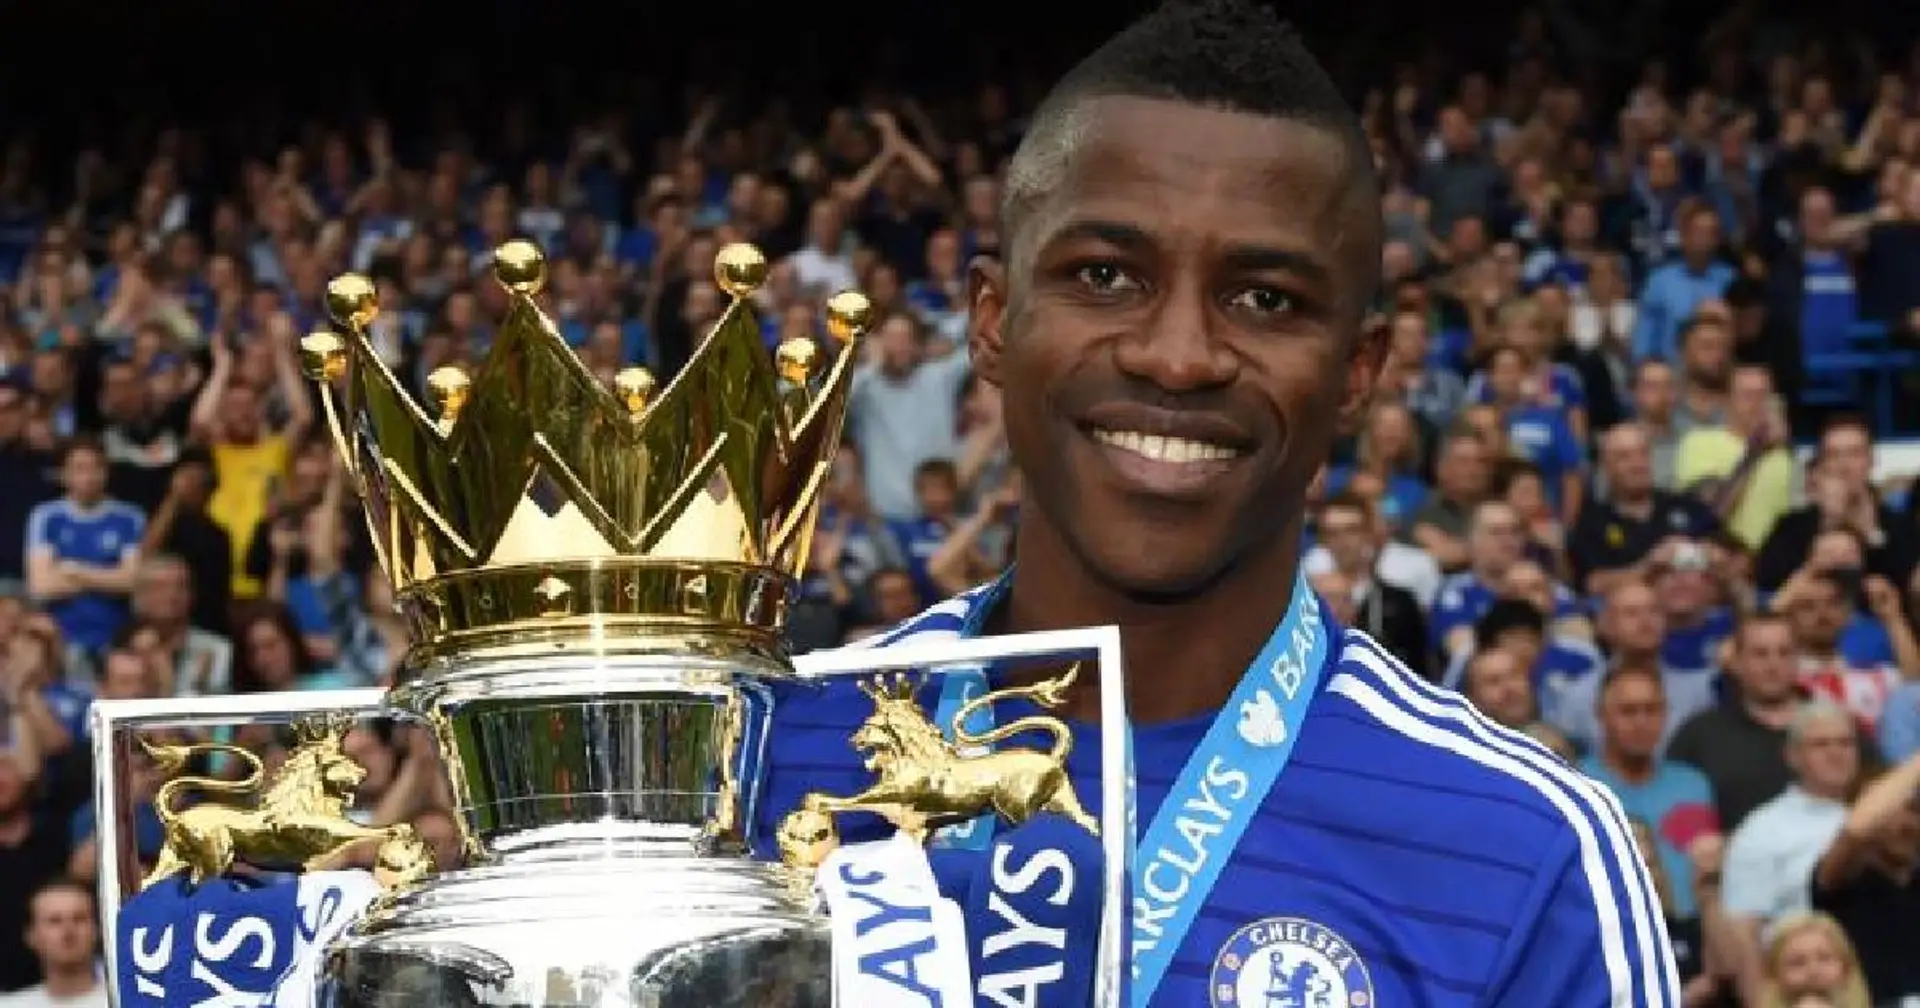 Why Chelsea fans called Ramires a 'Blue Kenyan'